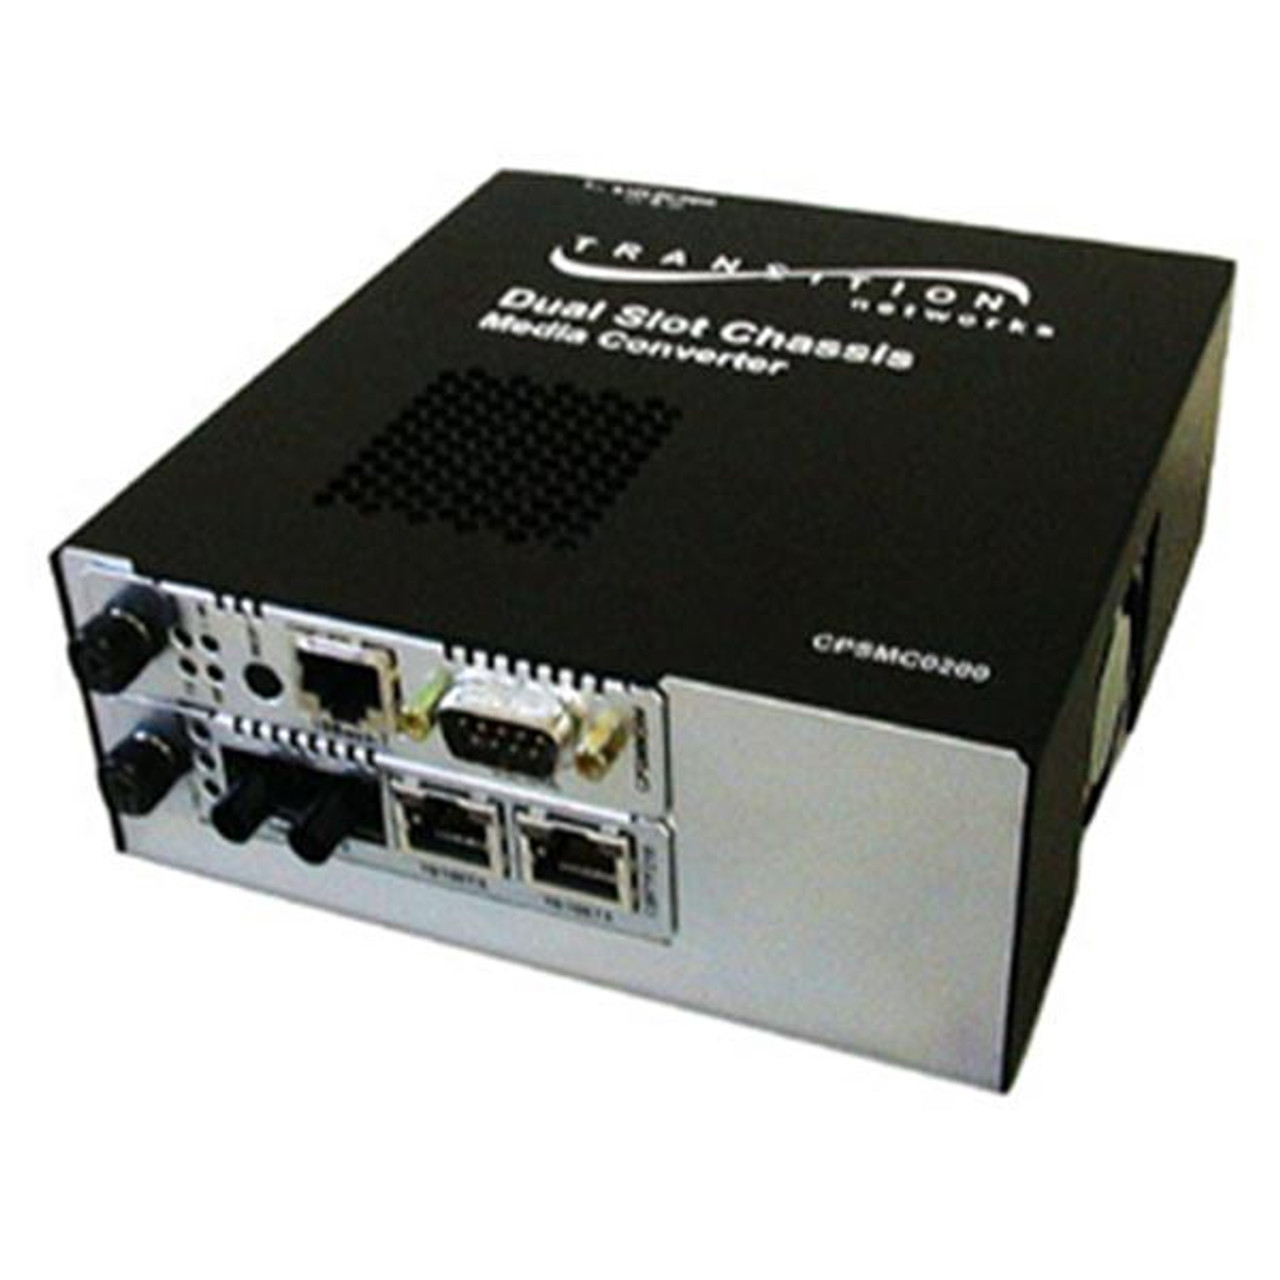 CPSMC0200-200-LA Transition 2-Slot Point System Chassis